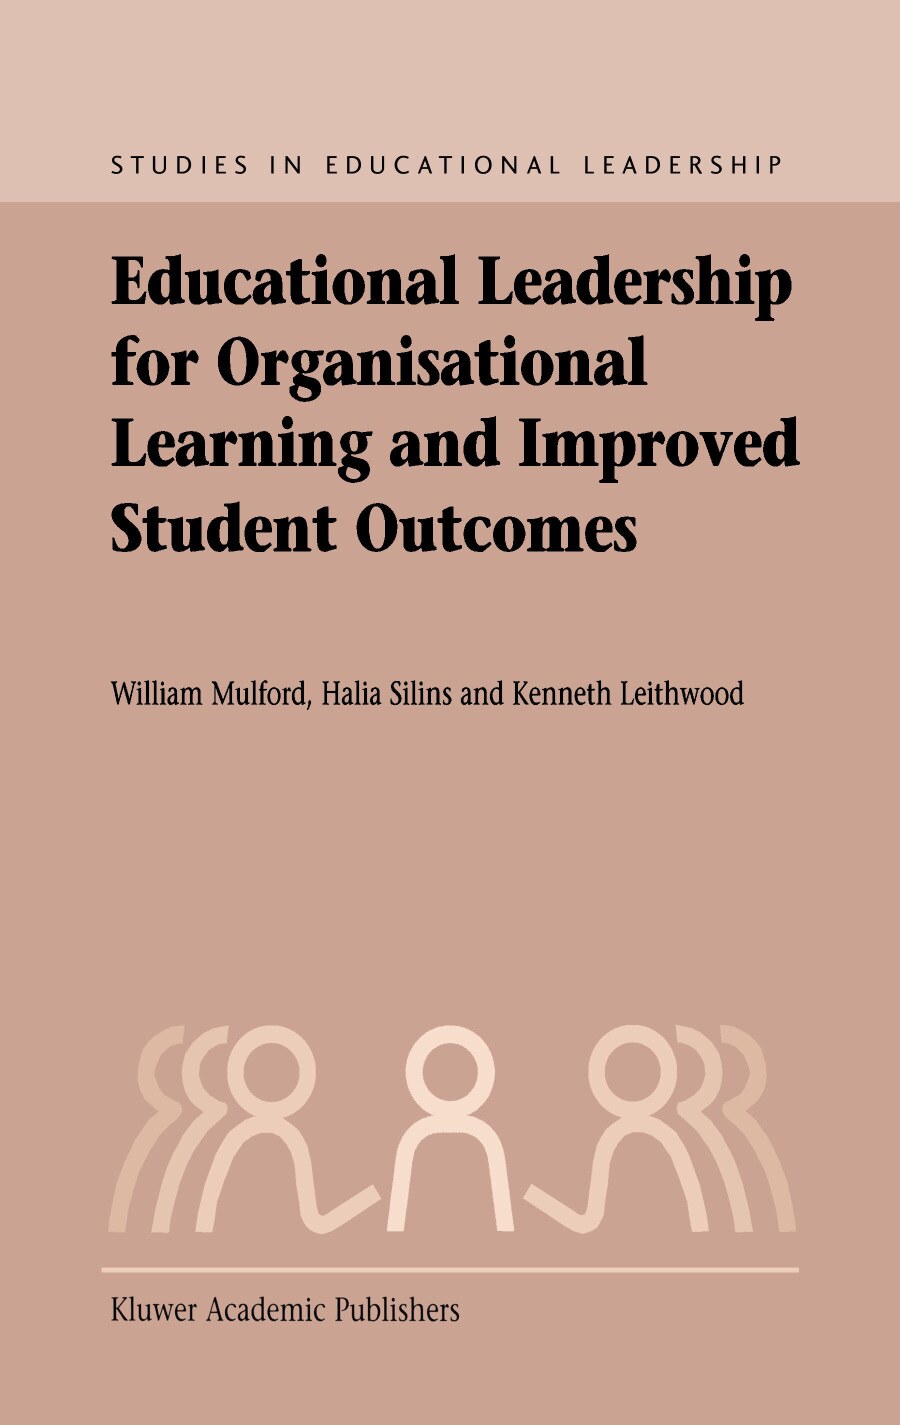 Bill Mulford, Halia Silins, K.A. Leithwood - Educational Leadership for Organisational Learning and Improved Student Outcomes (Studies in Educational Leadership)-Springer (2004)